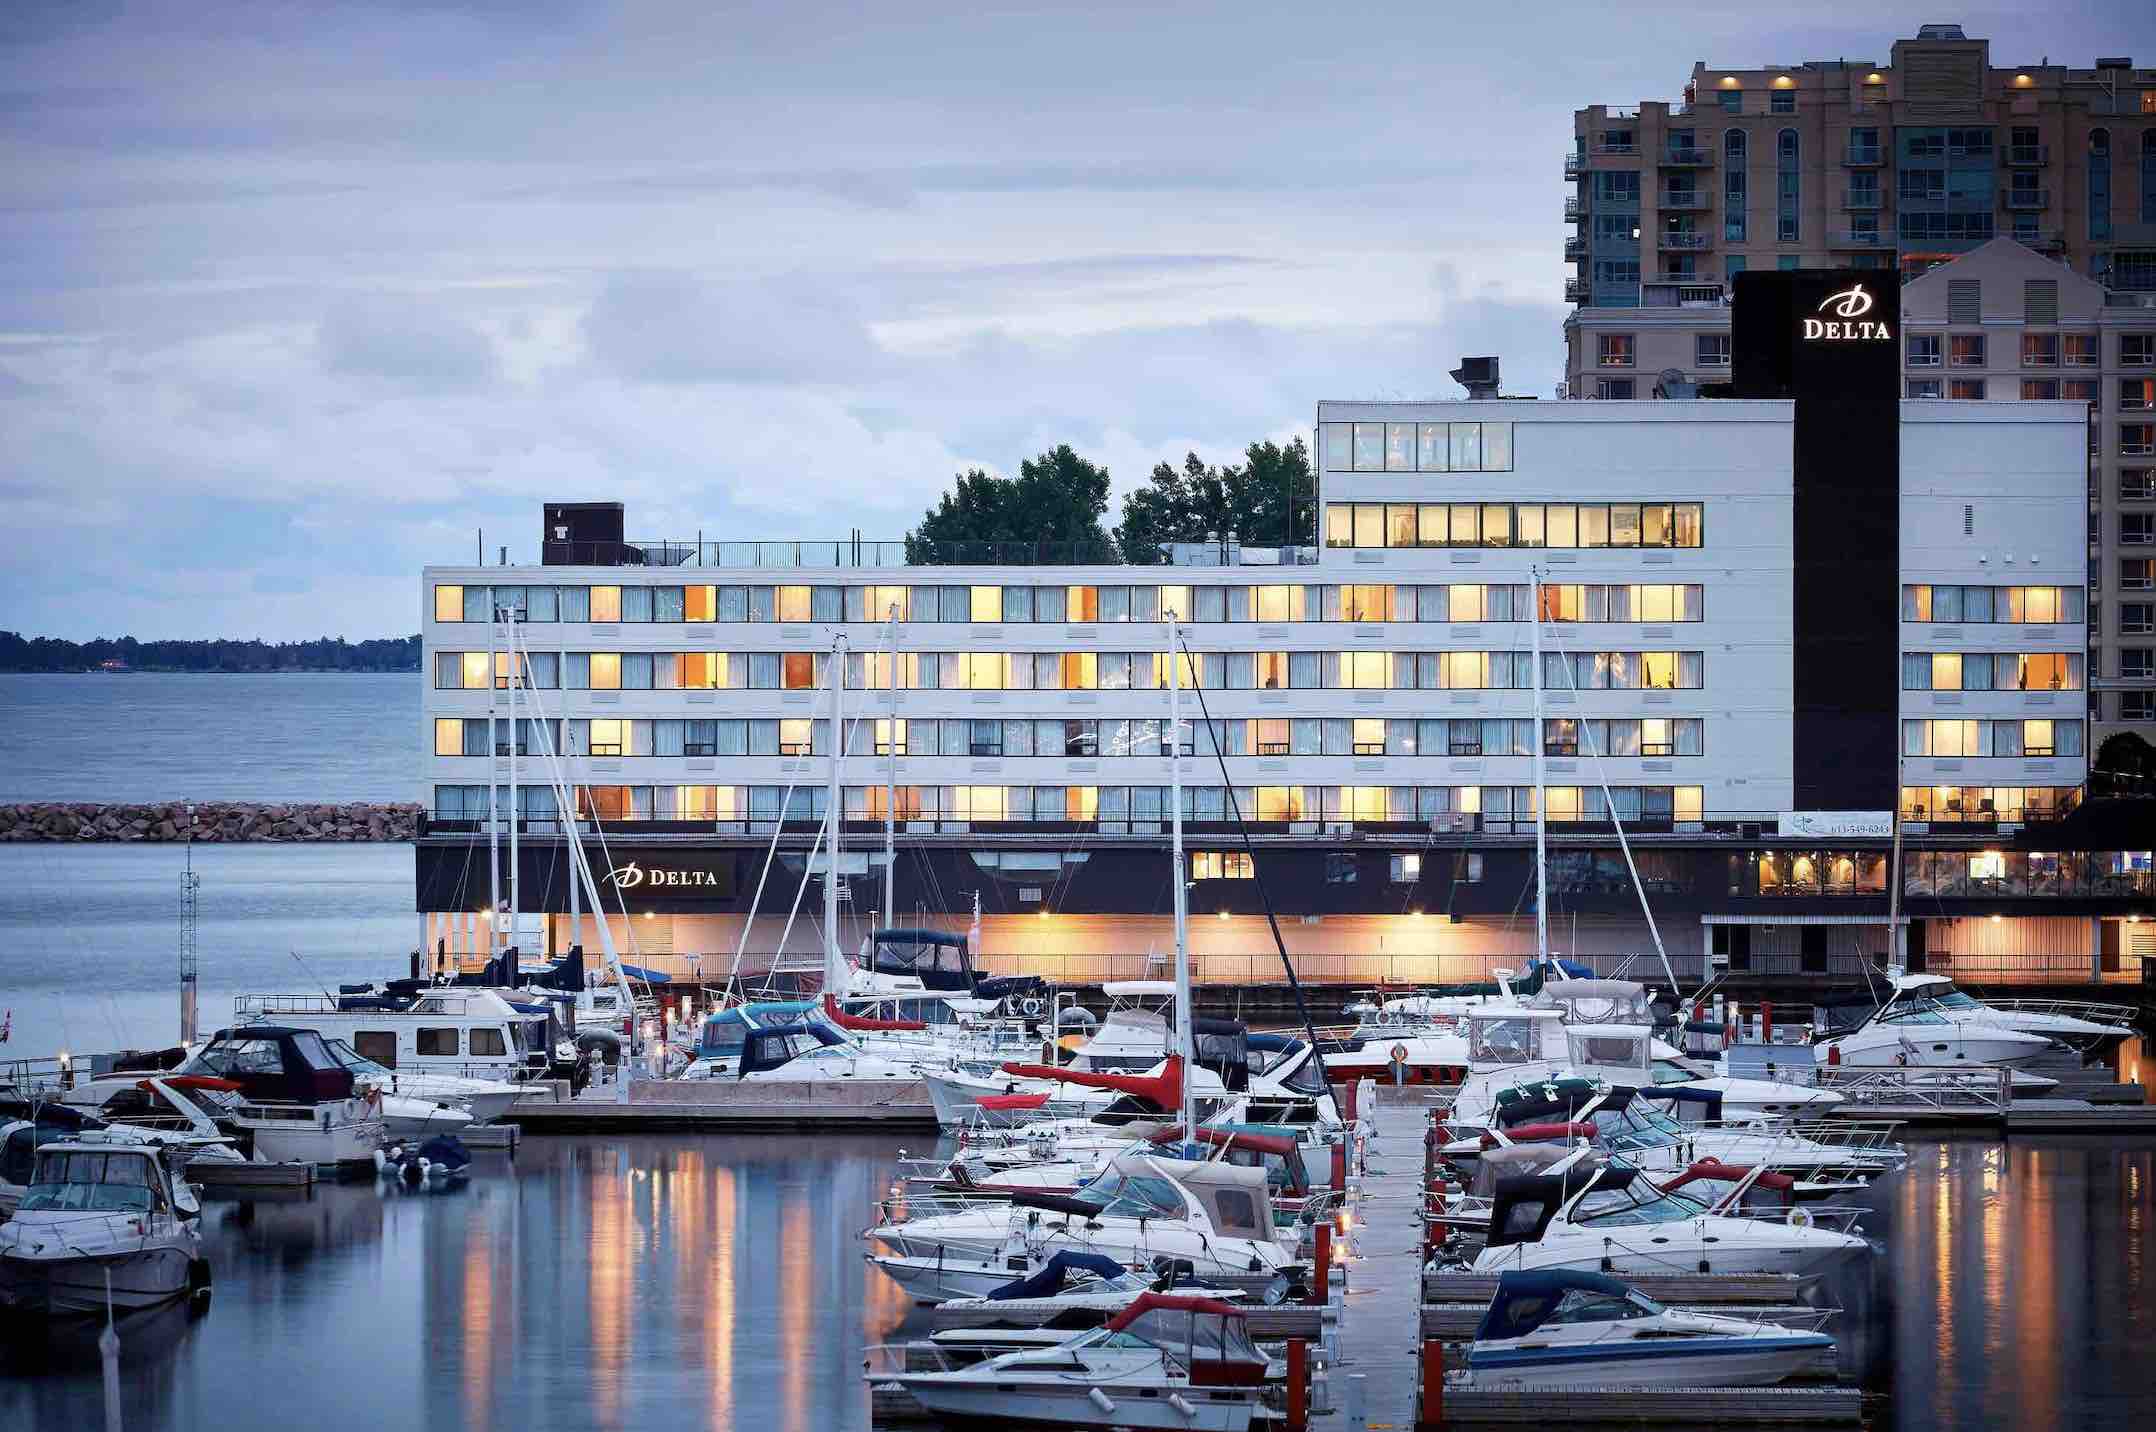 Delta Waterfront Hotel, boutique hotels in Kingston waterfront location next to lake and marina